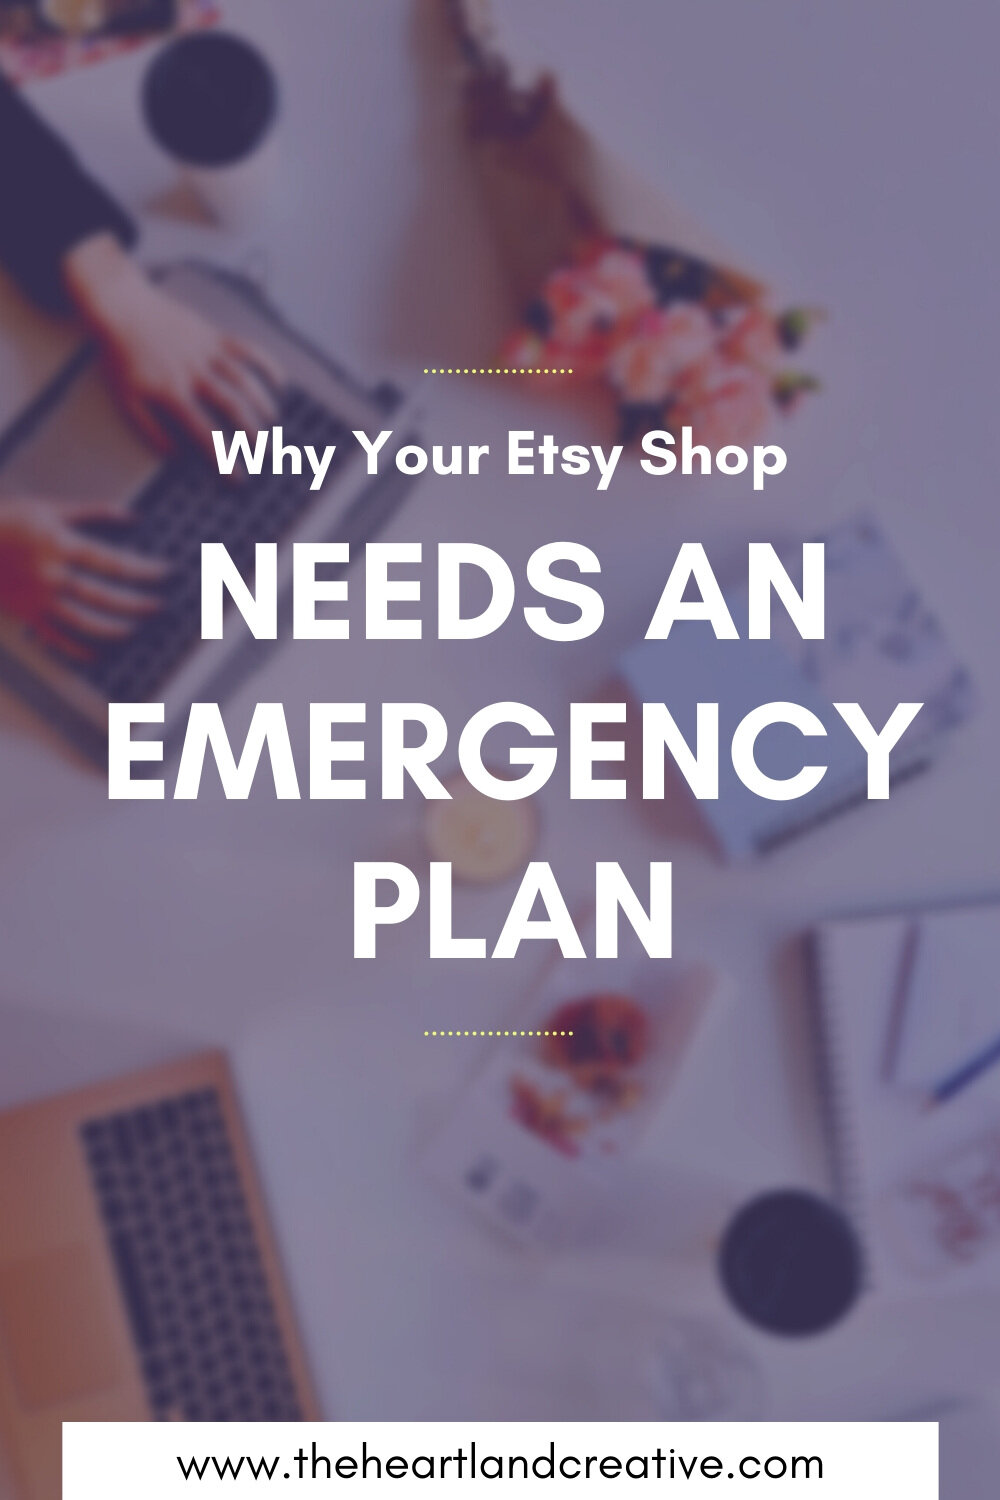 Why Your Etsy Shop Needs an Emergency Plan HC.jpg